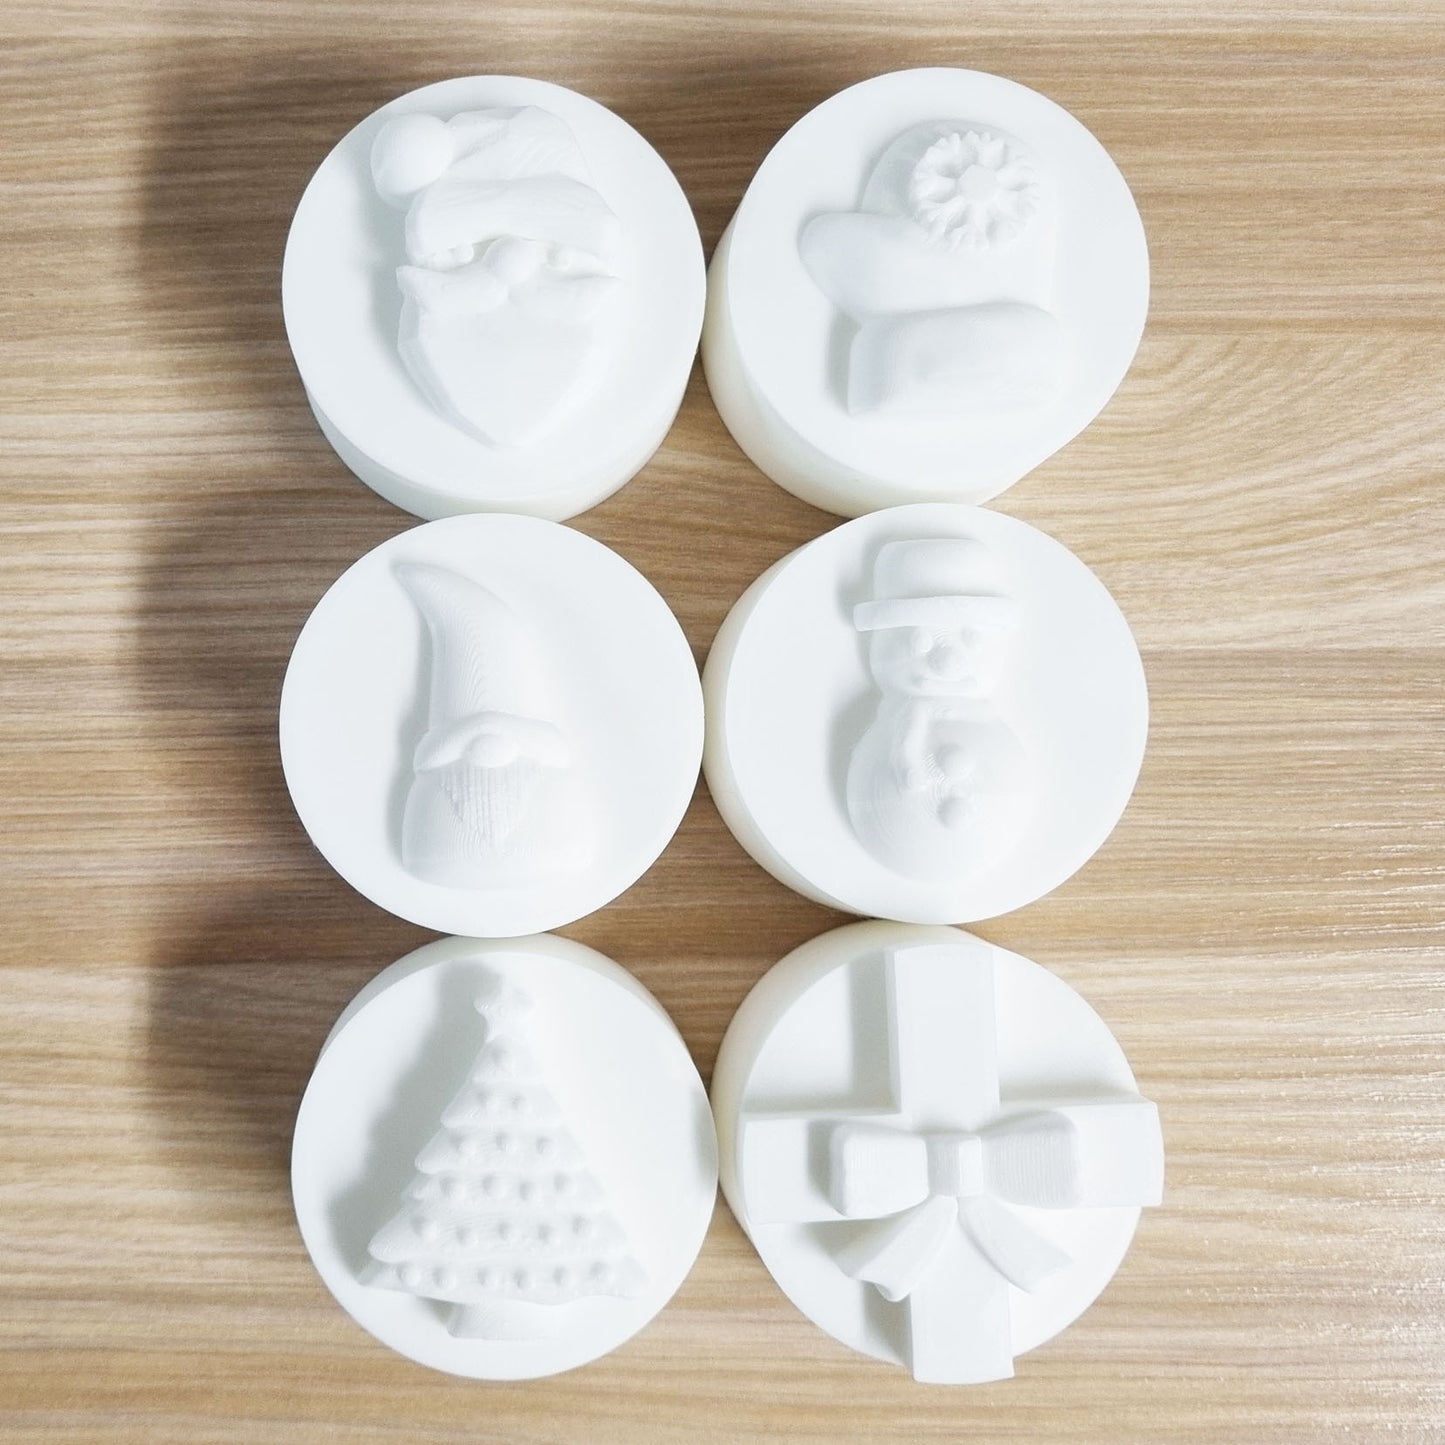 Christmas Advent Moulds | Truly Personal | Bath Bomb, Soap, Resin, Chocolate, Jelly, Wax Melts Mold